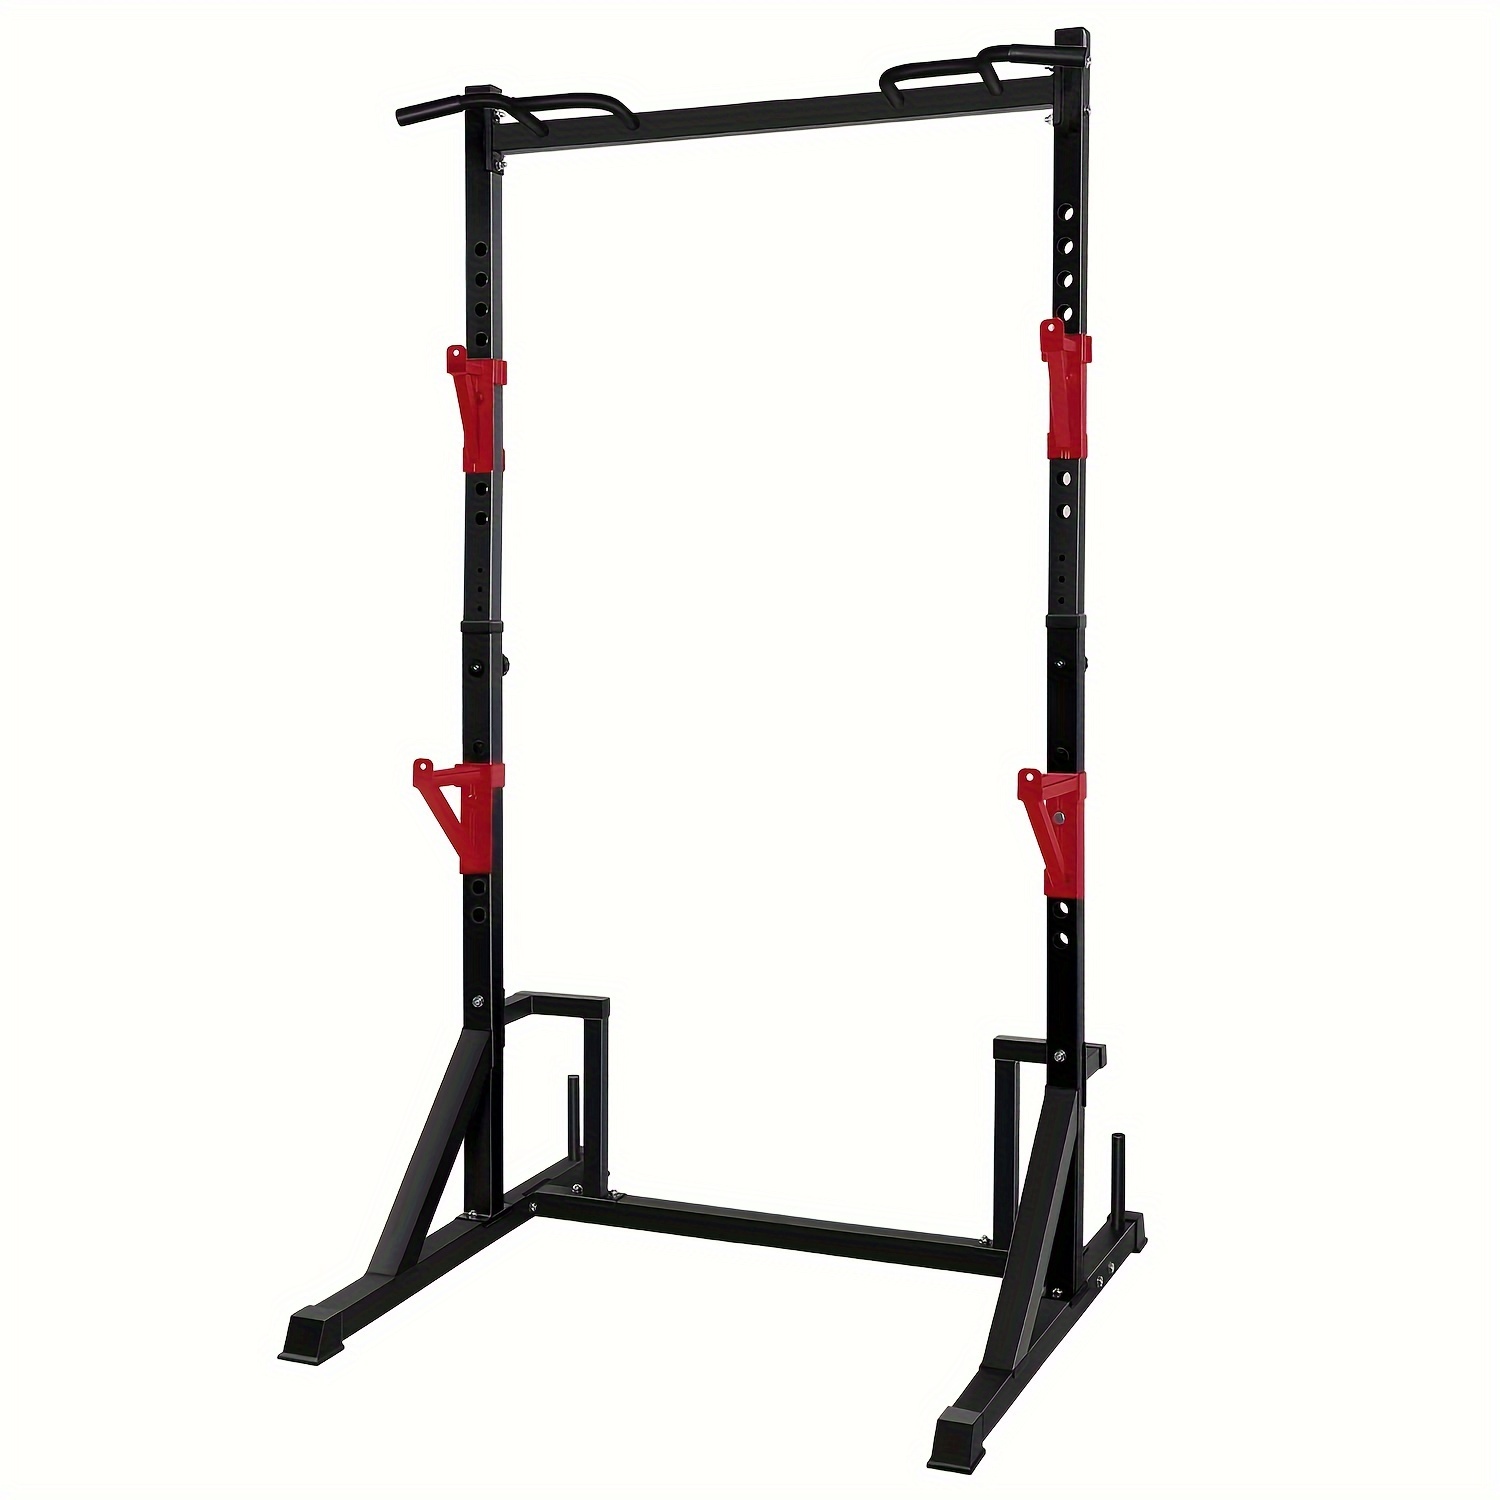 

Power Rack Cage, Heavy Capacity And Adjustable Power Rack With Pull Up Bar, Multifunction Squat Stand Rack For Gym Home Strength Training Exercise Workout Equipment